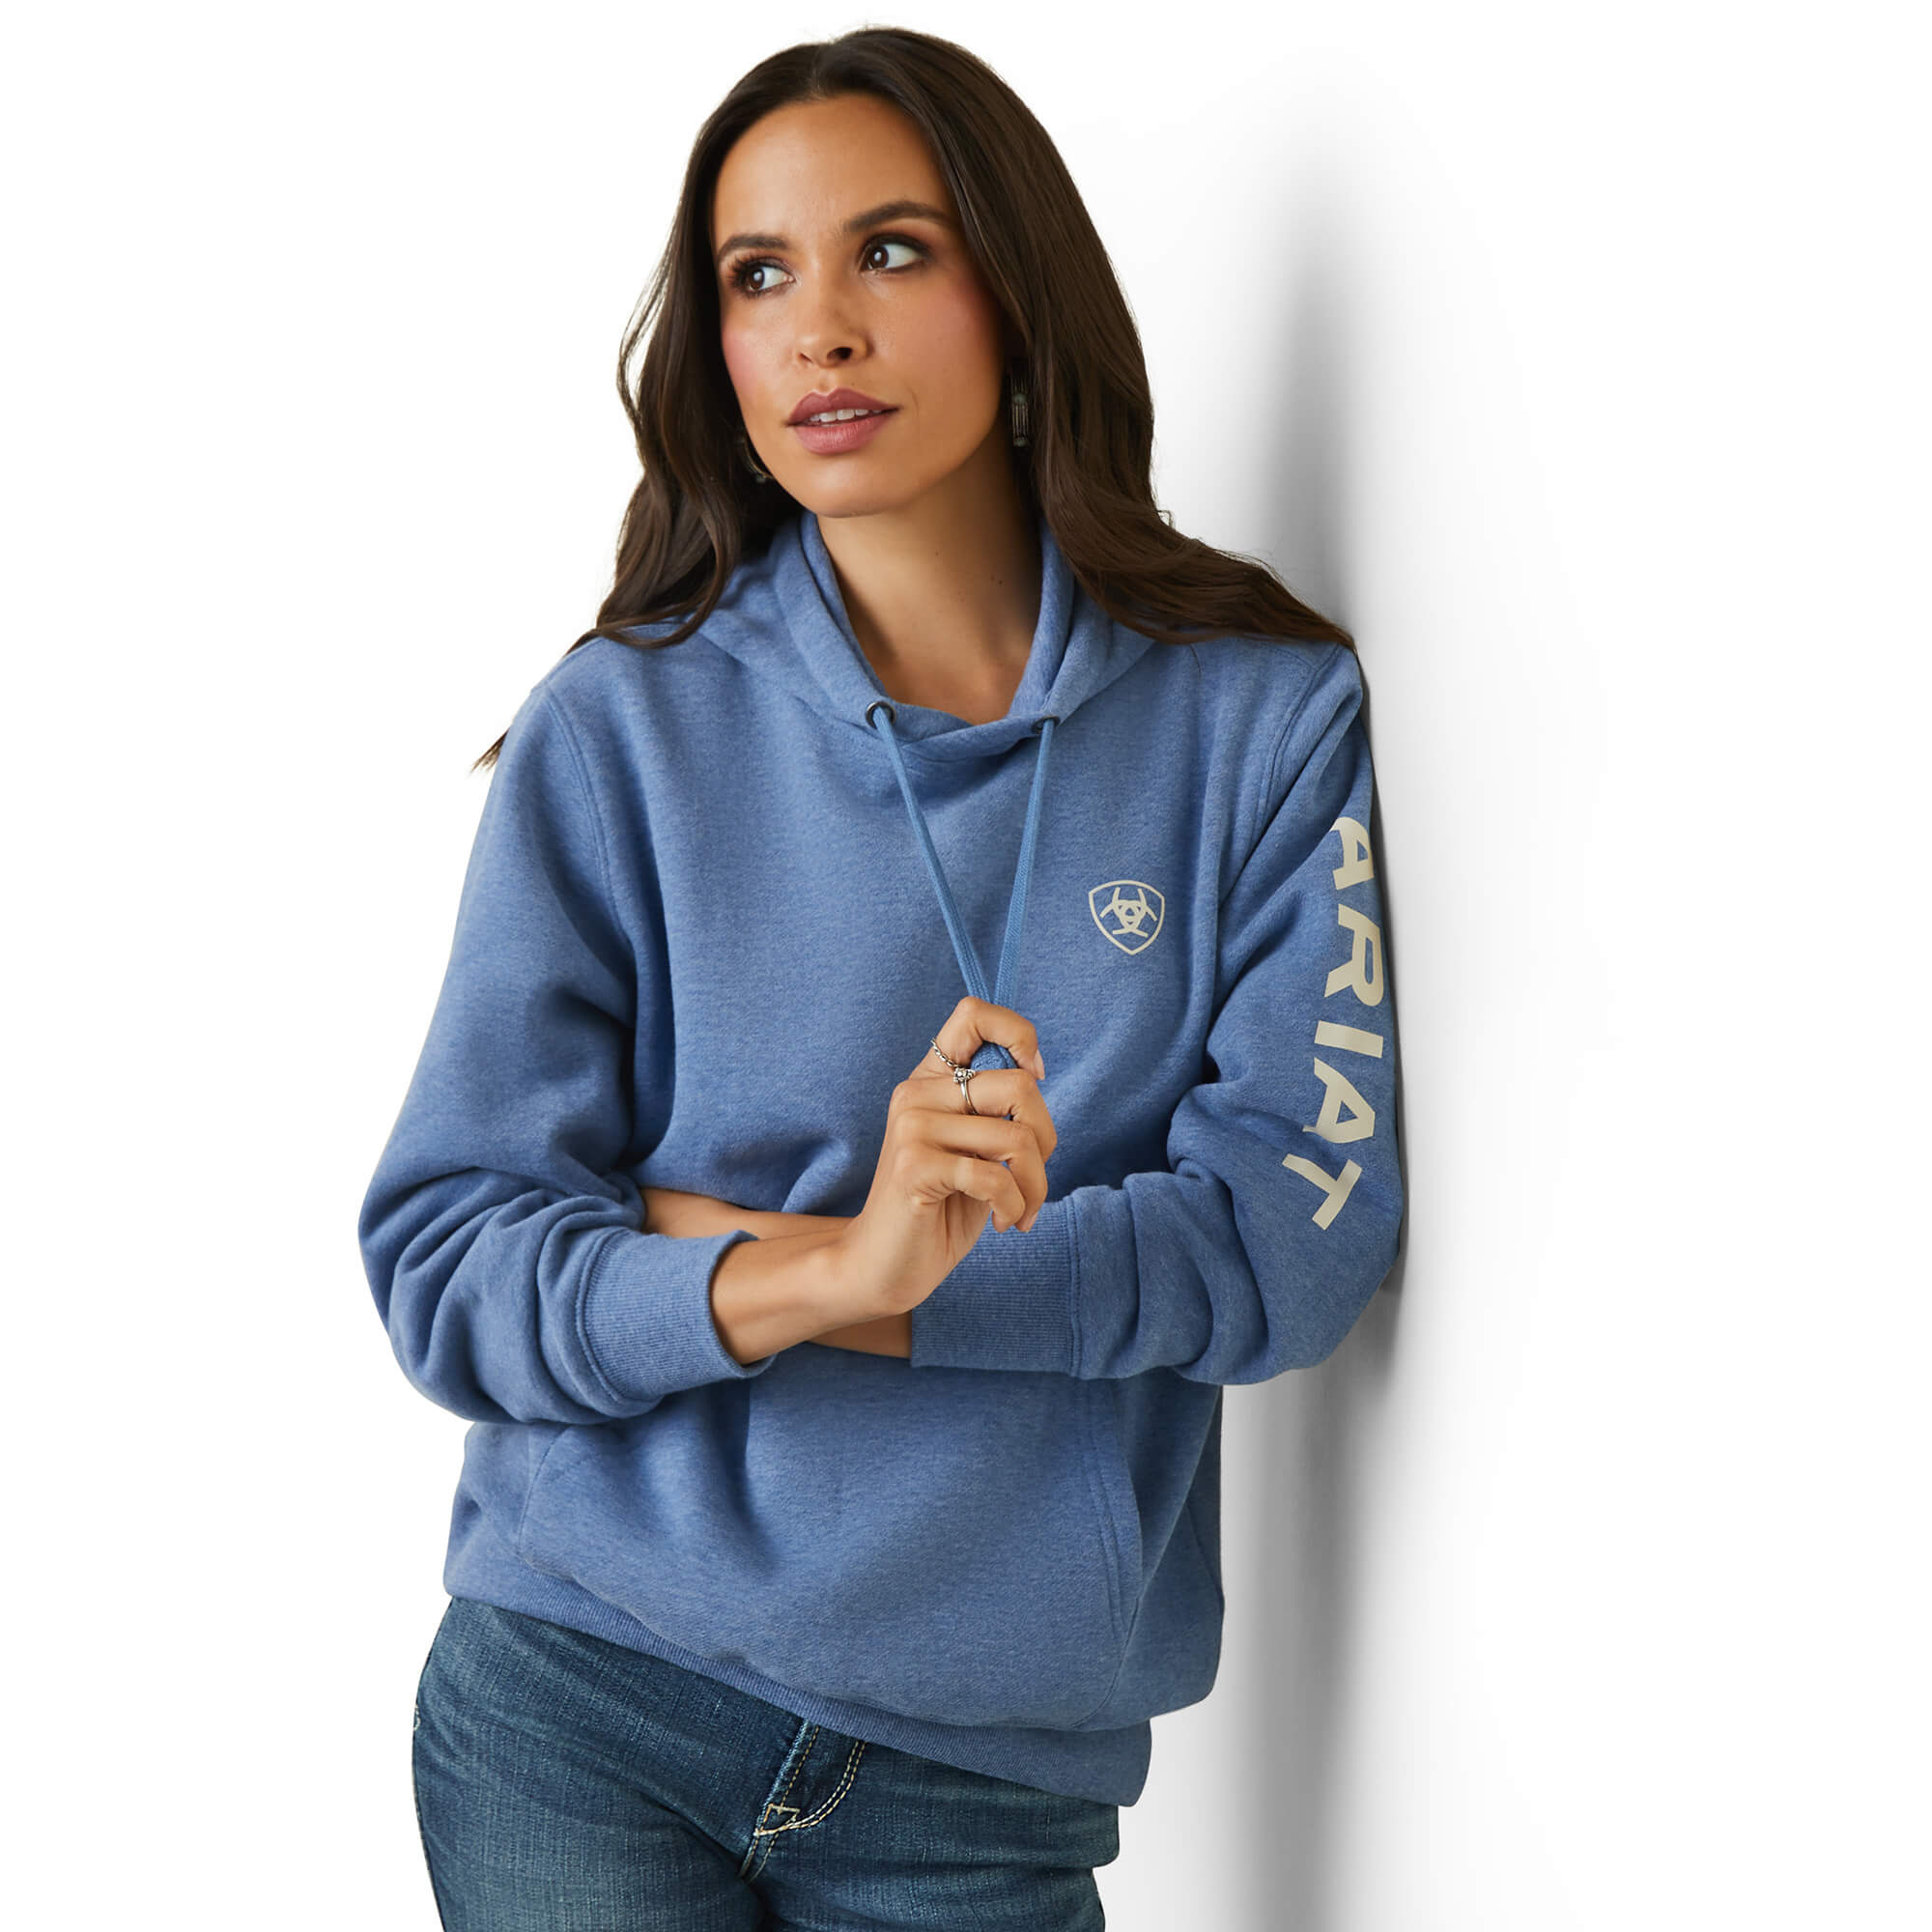 Featured image for “Ariat Logo Hoodie”